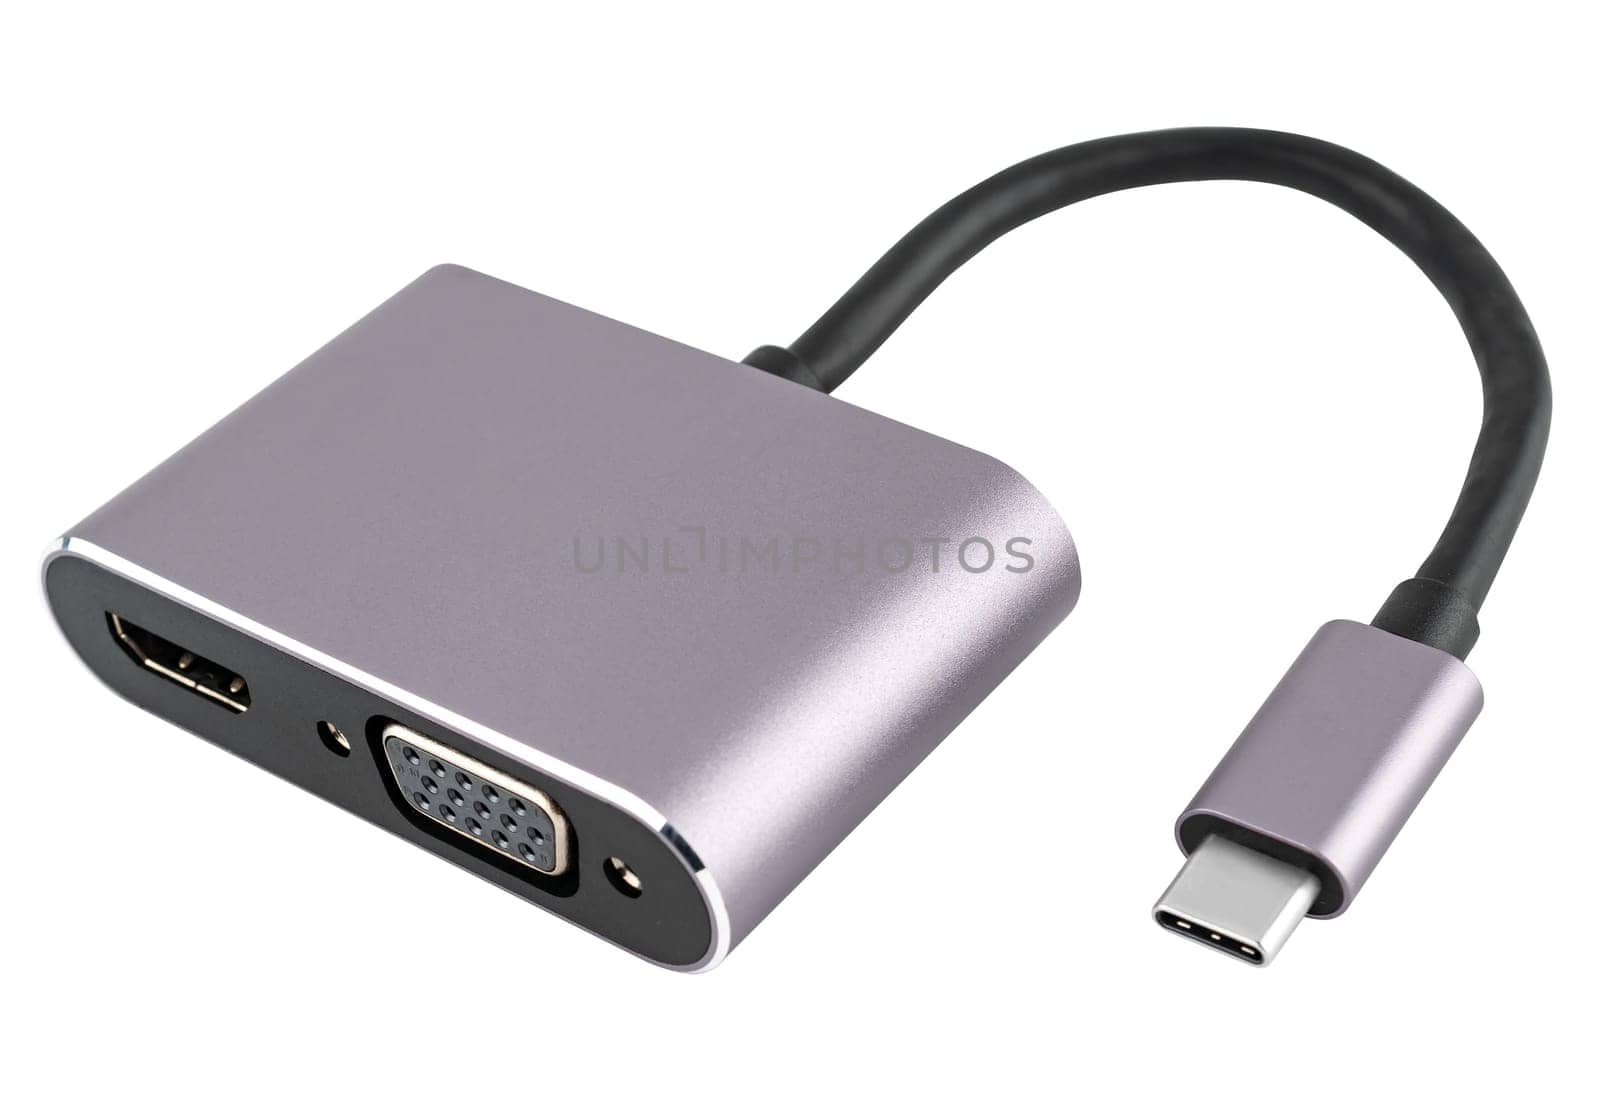 usb-hub adapter cable for computer